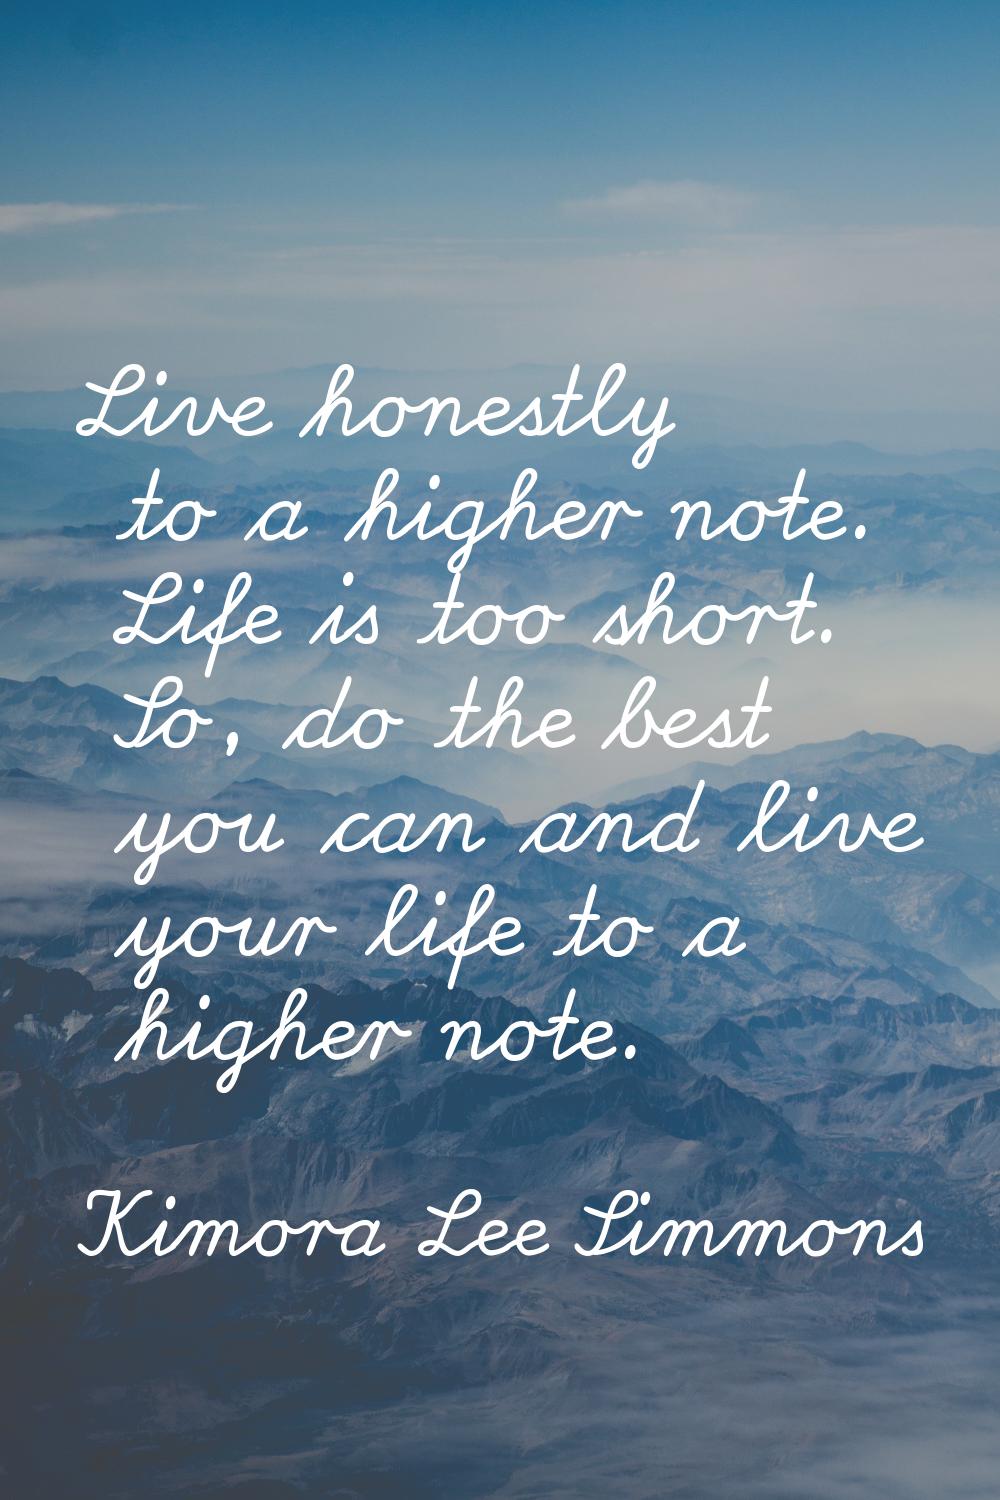 Live honestly to a higher note. Life is too short. So, do the best you can and live your life to a 